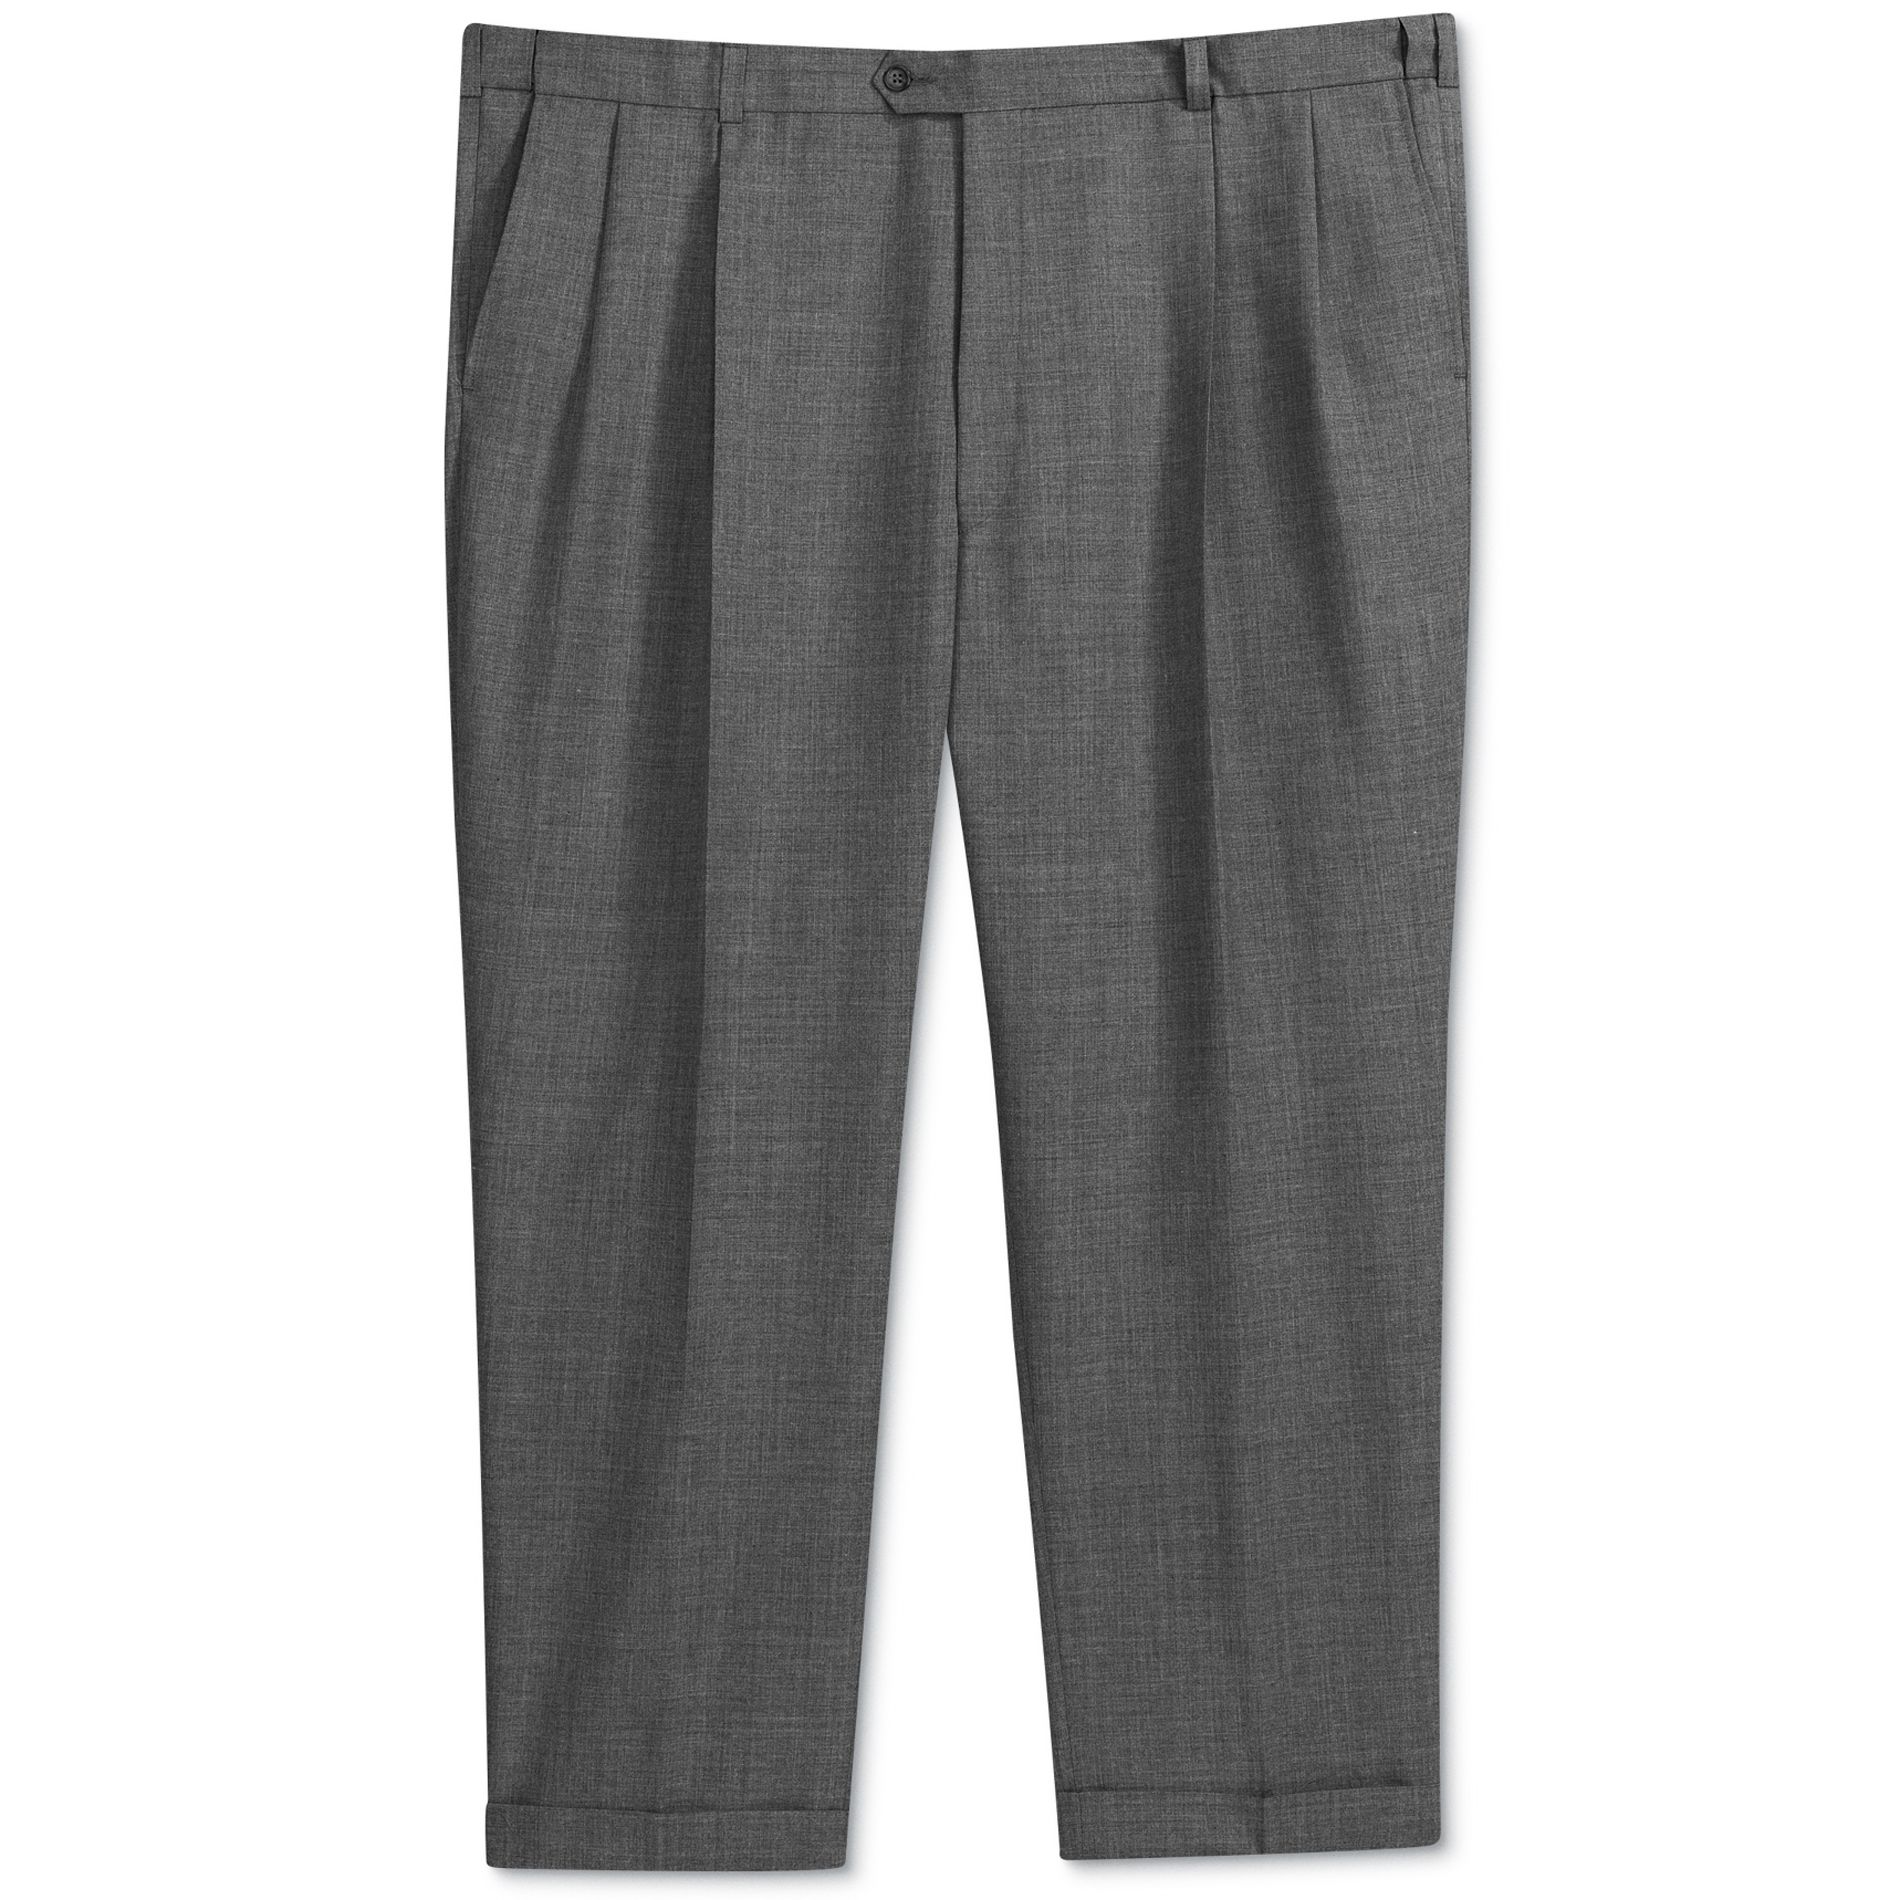 Comfort Zone Waist Relaxer Men's Suit Separate Pant - Big & Tall